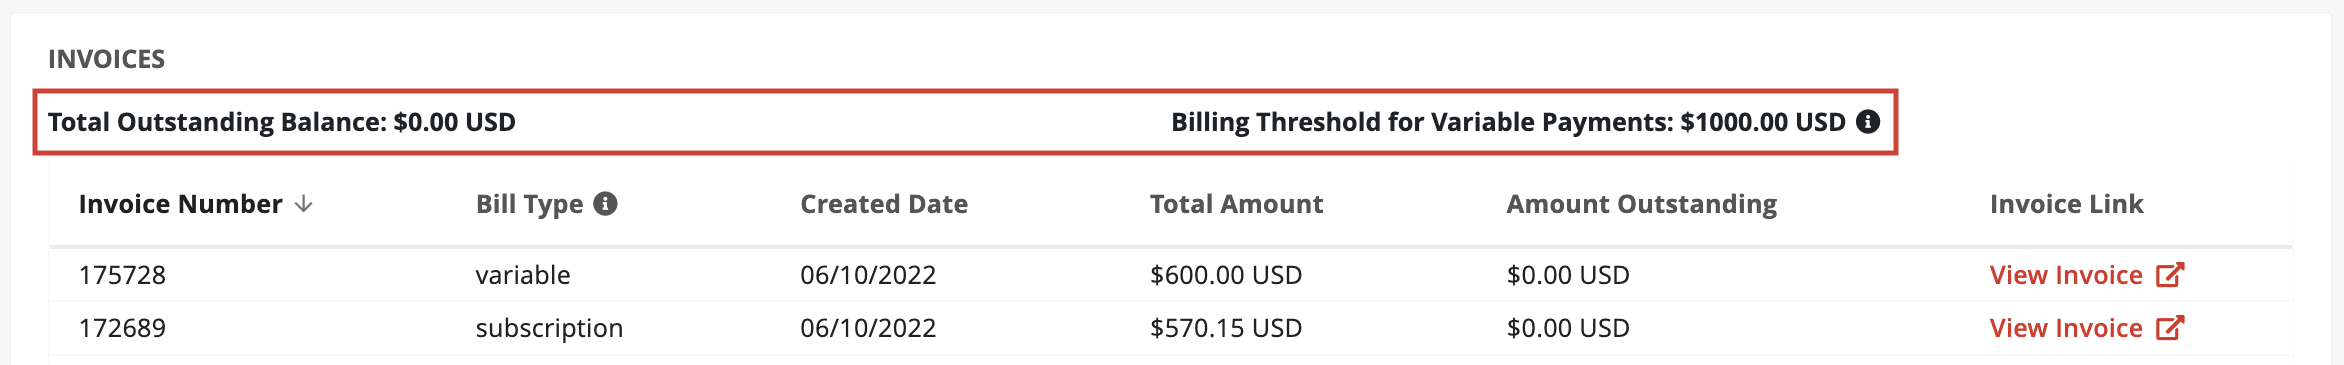 Invoices-Table_Balance_Threshold.png